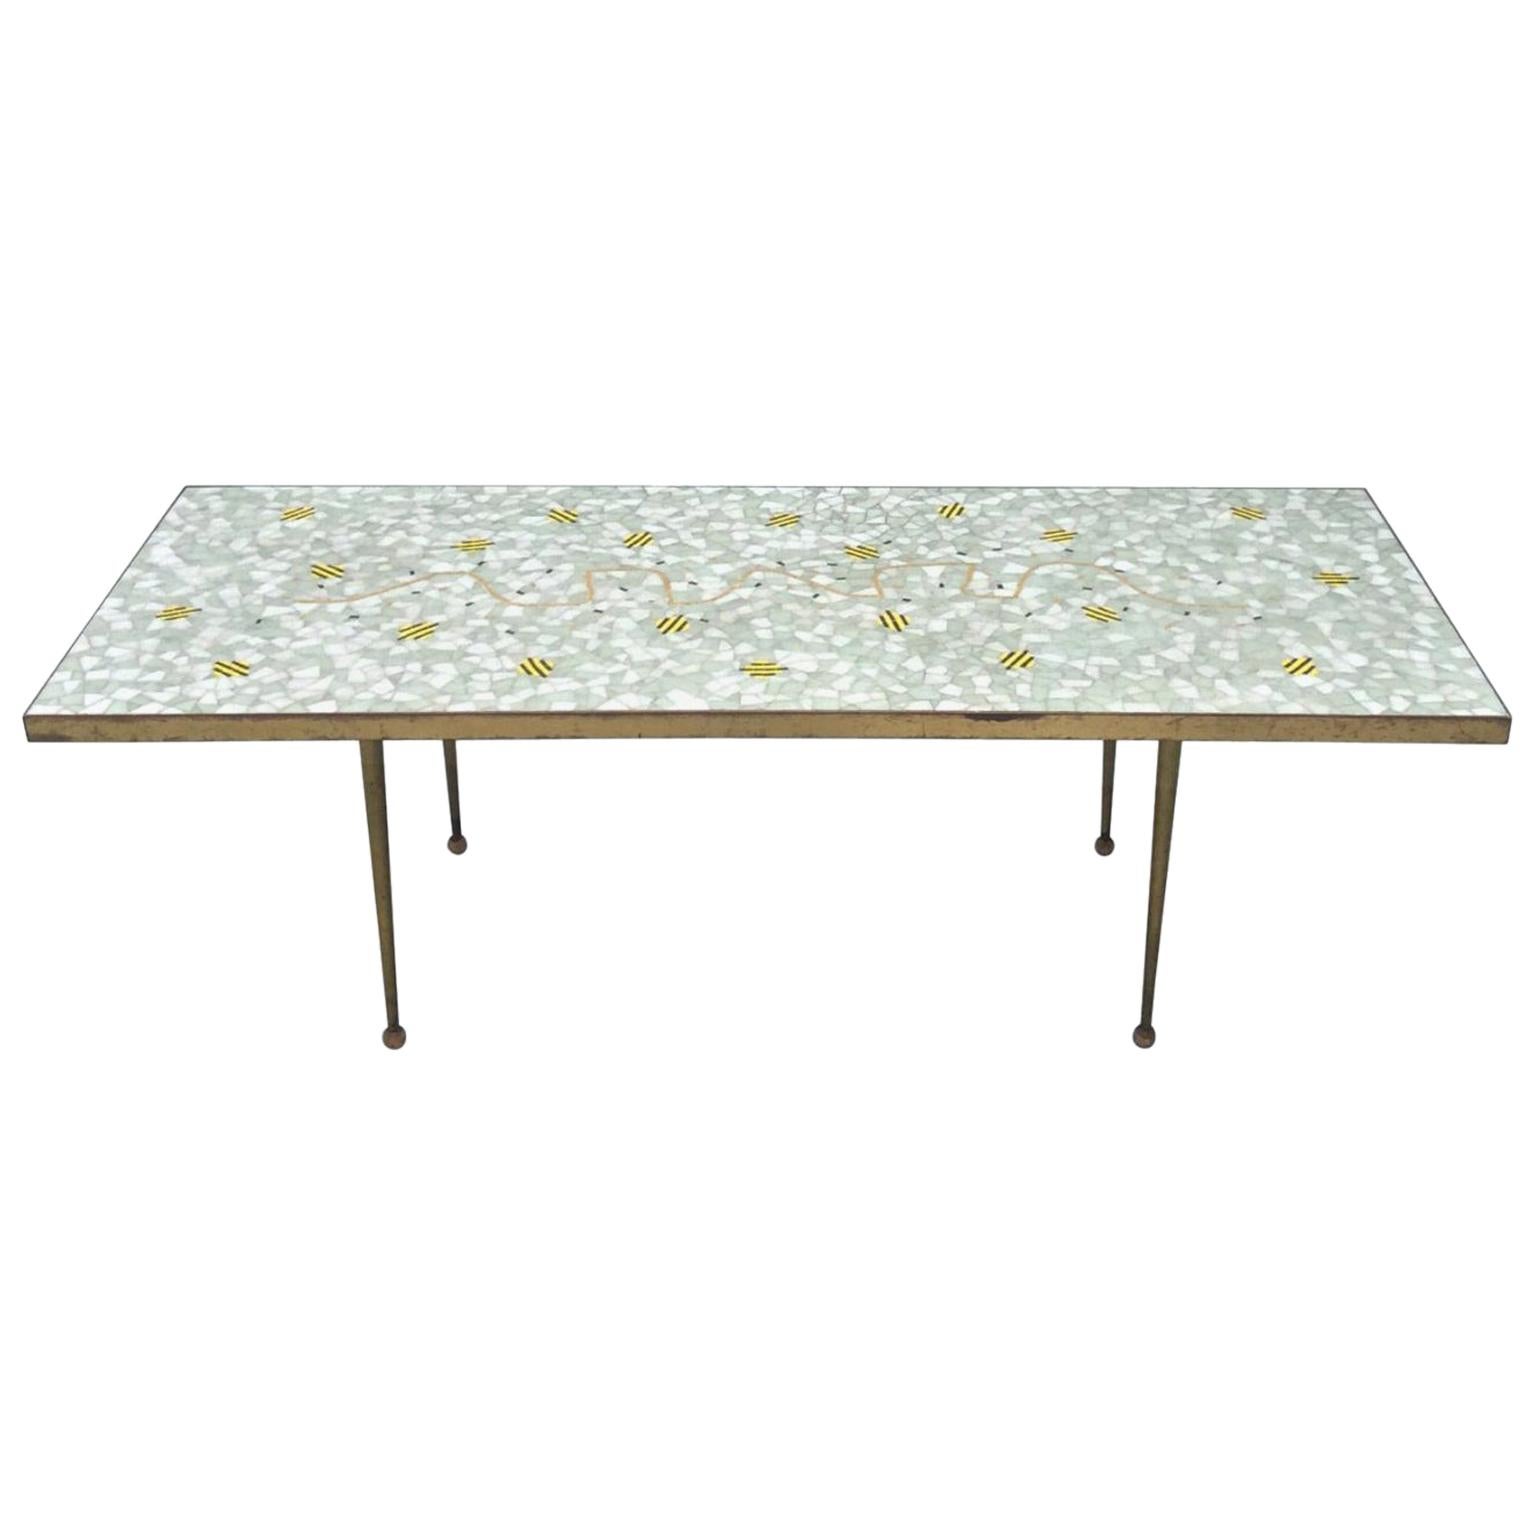 Decorative Mosaic Table with Brass Surround, 1950 For Sale